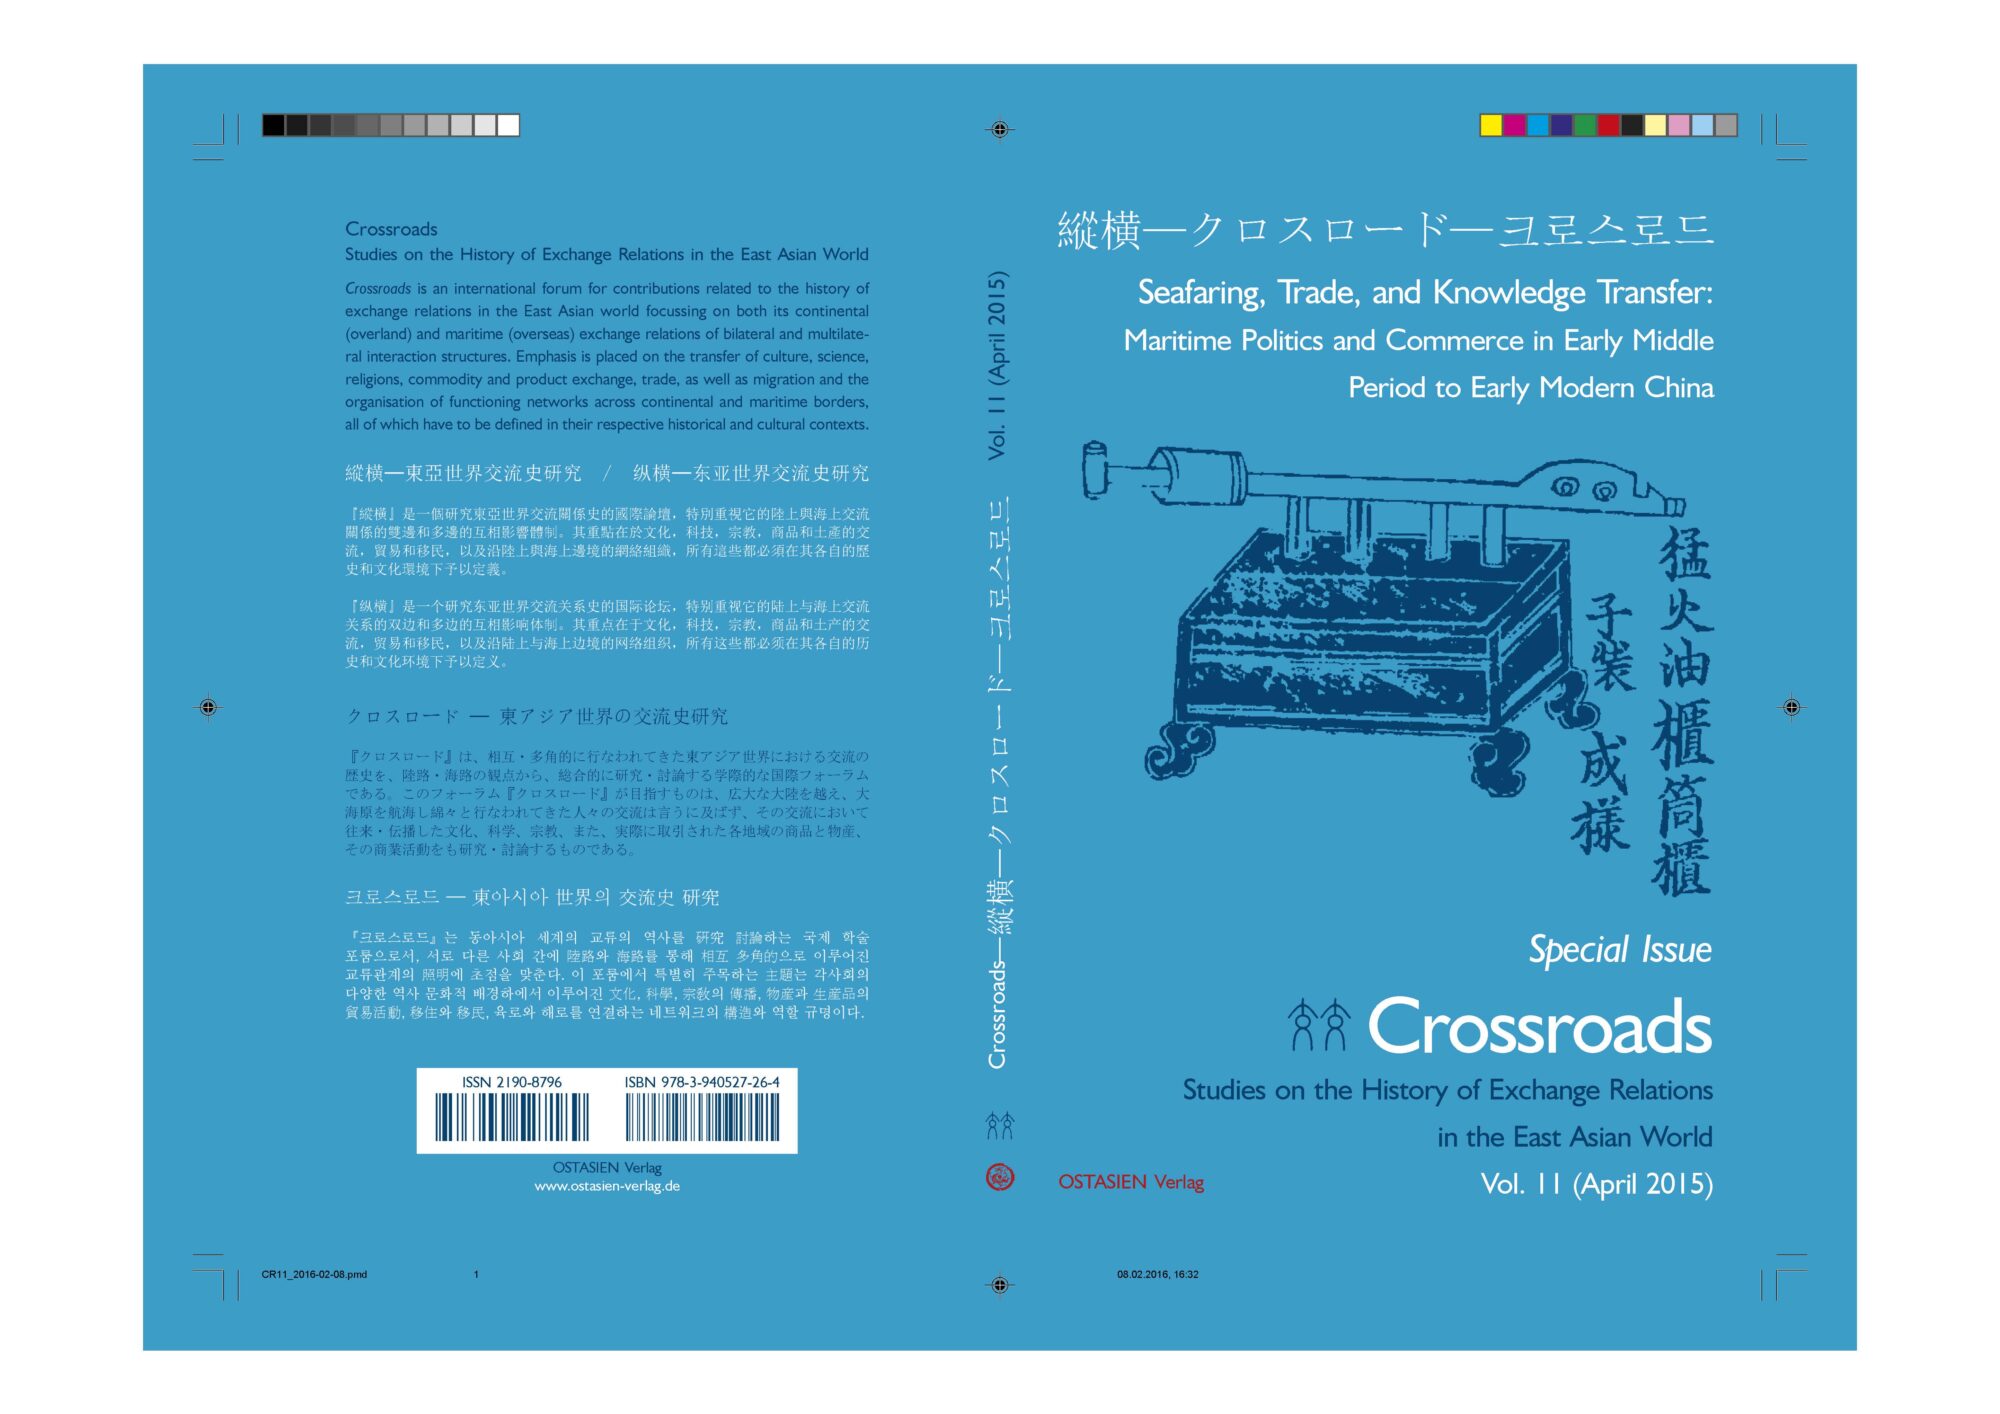 The new issue of Crossroads